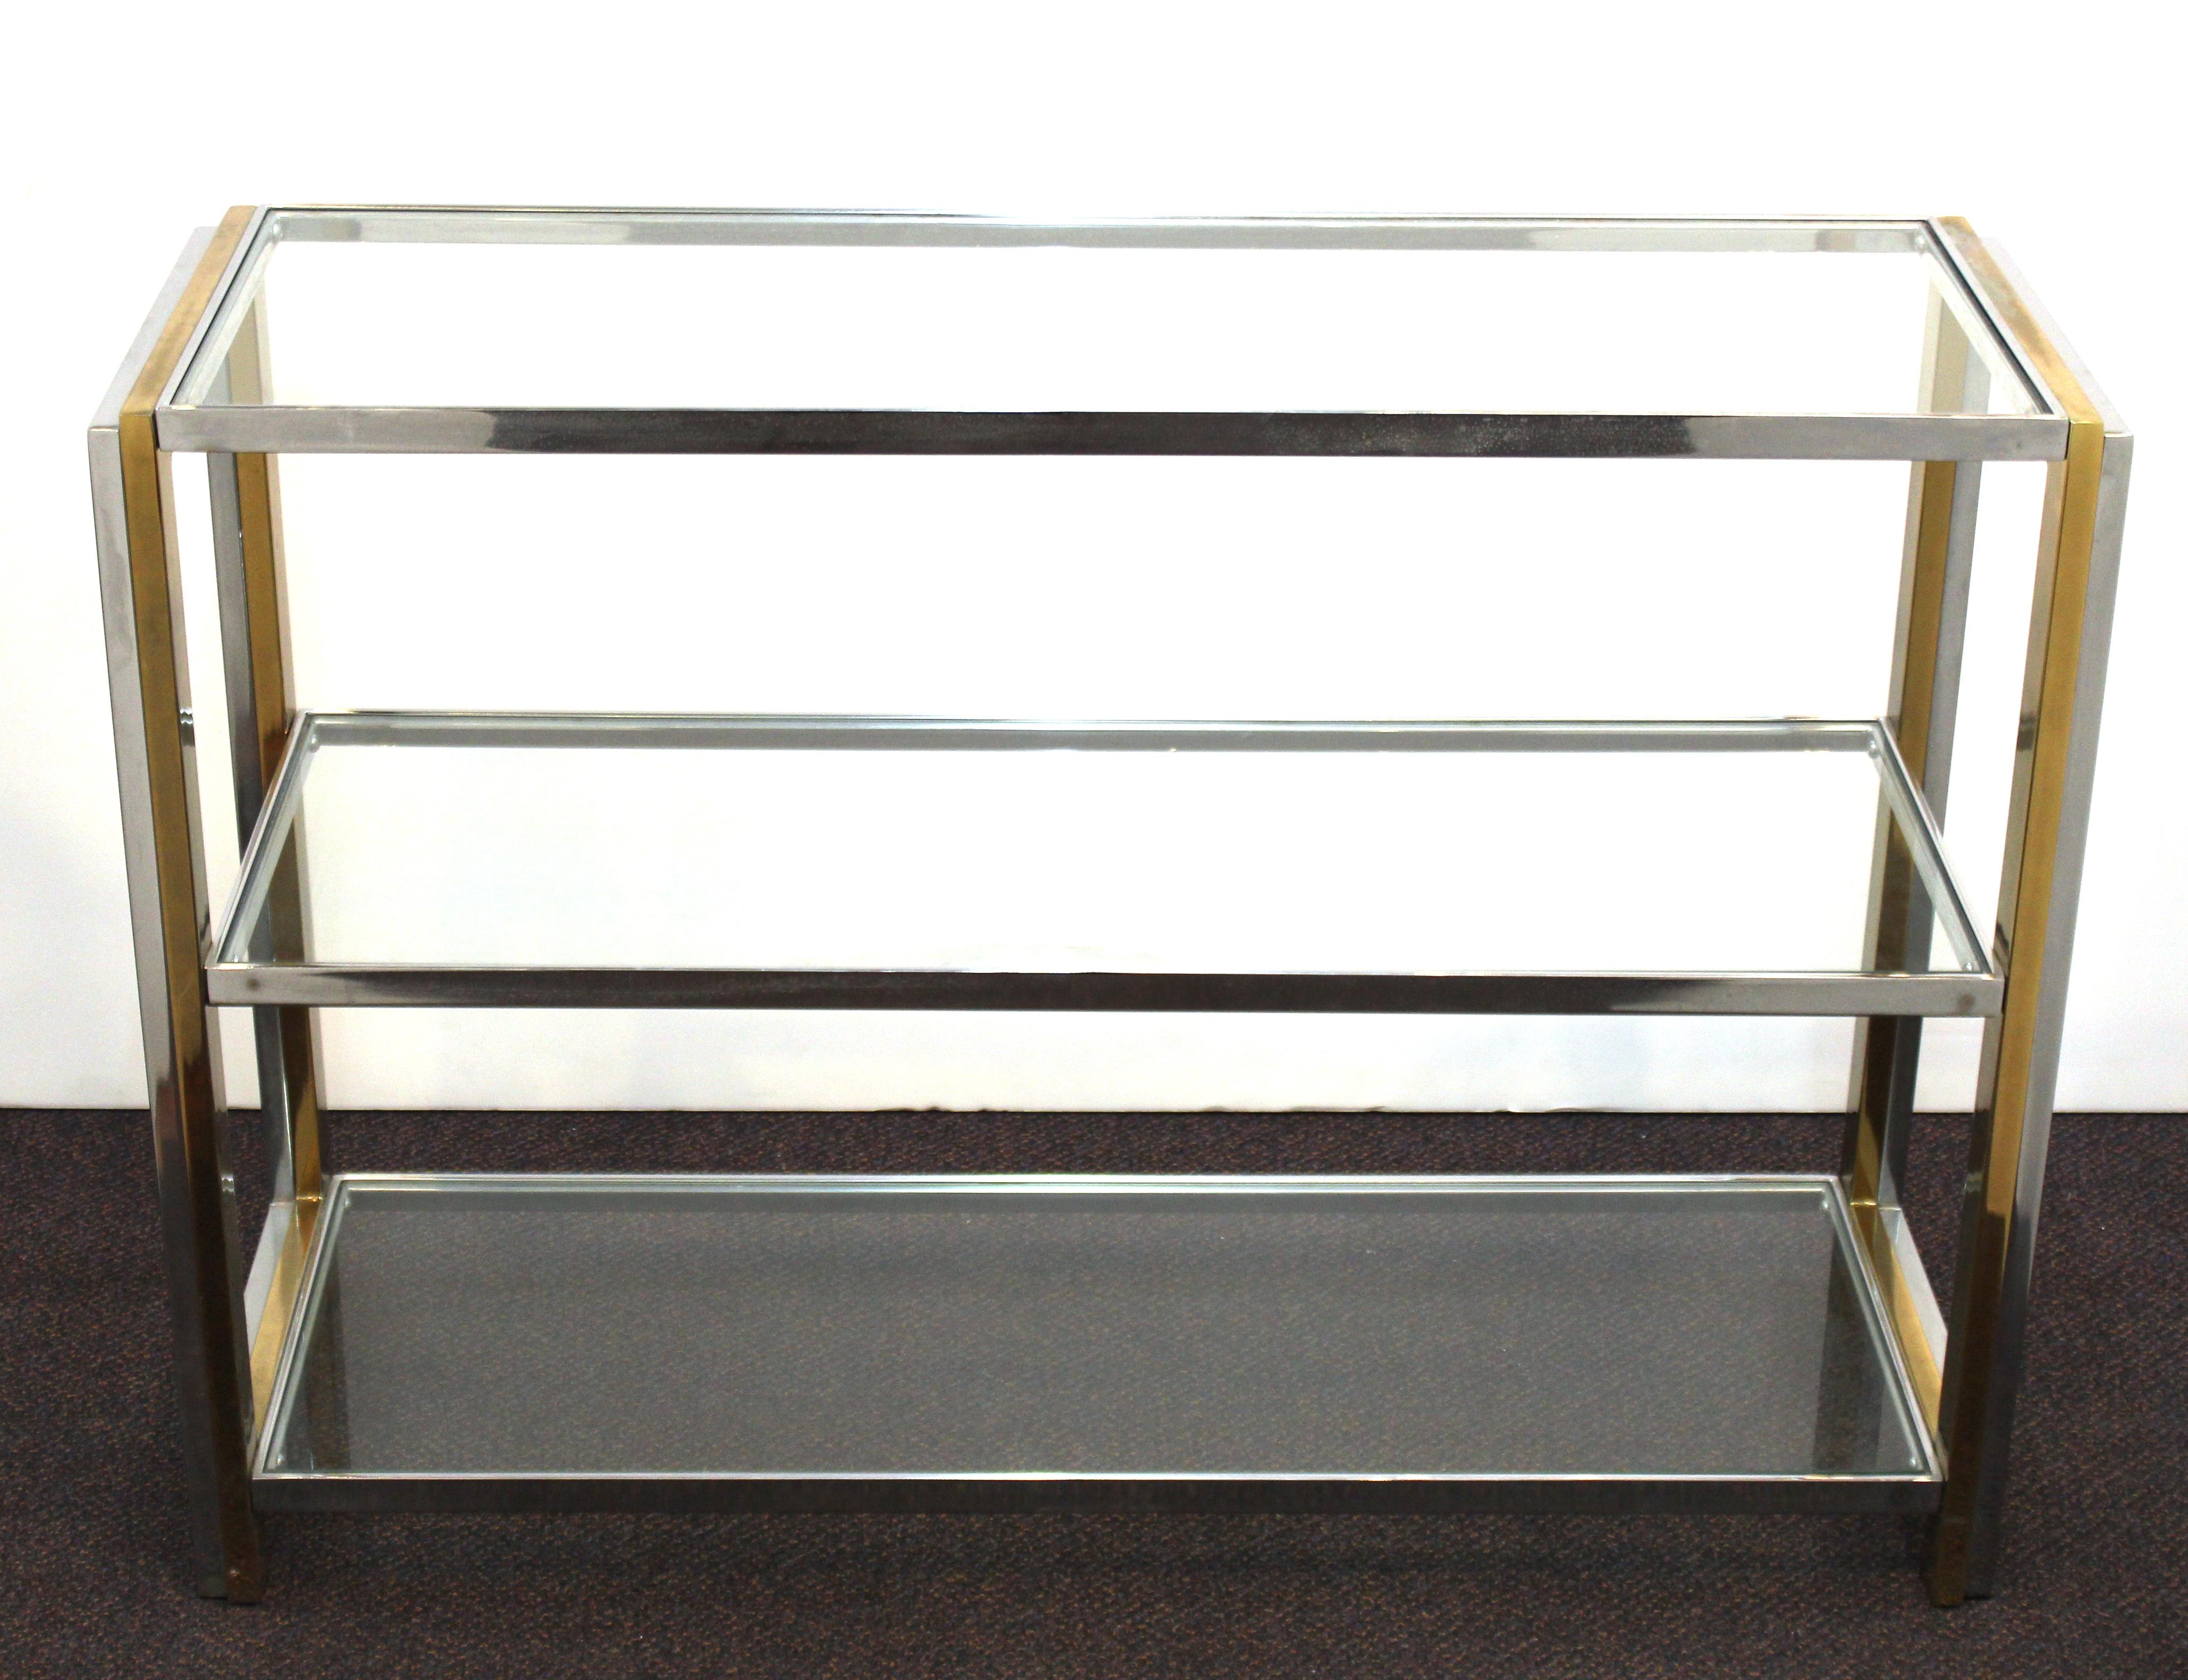 Modern sideboard in chromed metal with glass shelves. The piece has three levels of glass shelves and is in great vintage condition with age-appropriate wear.